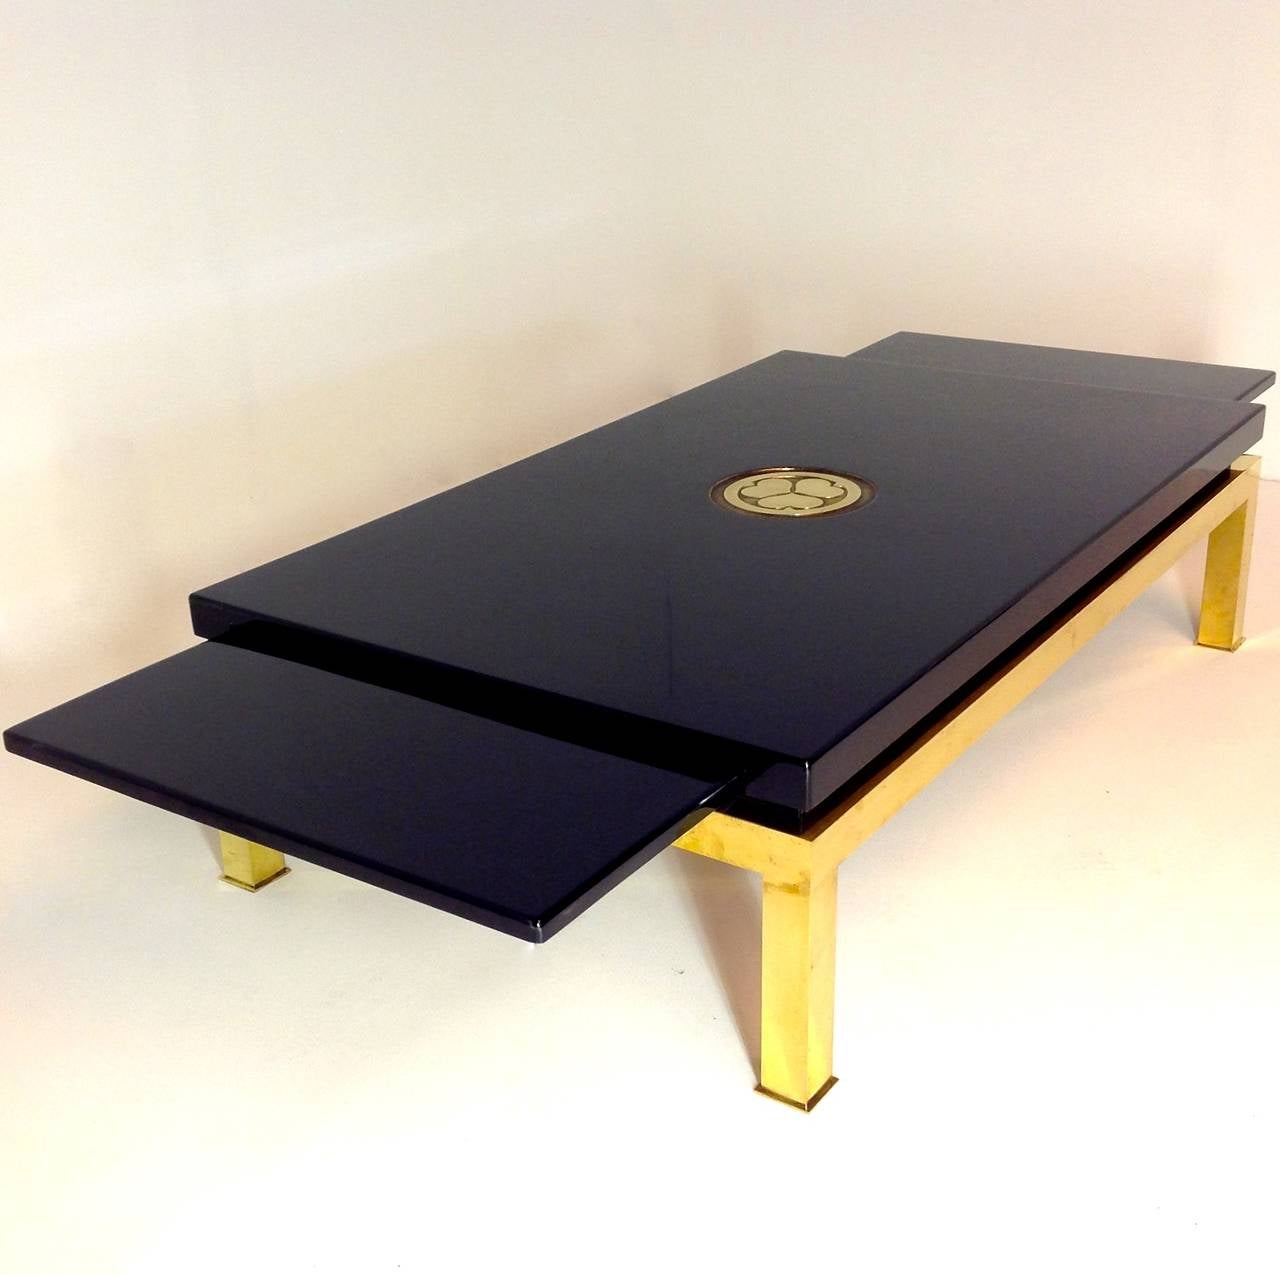 Italian Brass with Chinese Lacquered Wood, Coffee Table by Tommaso Barbi